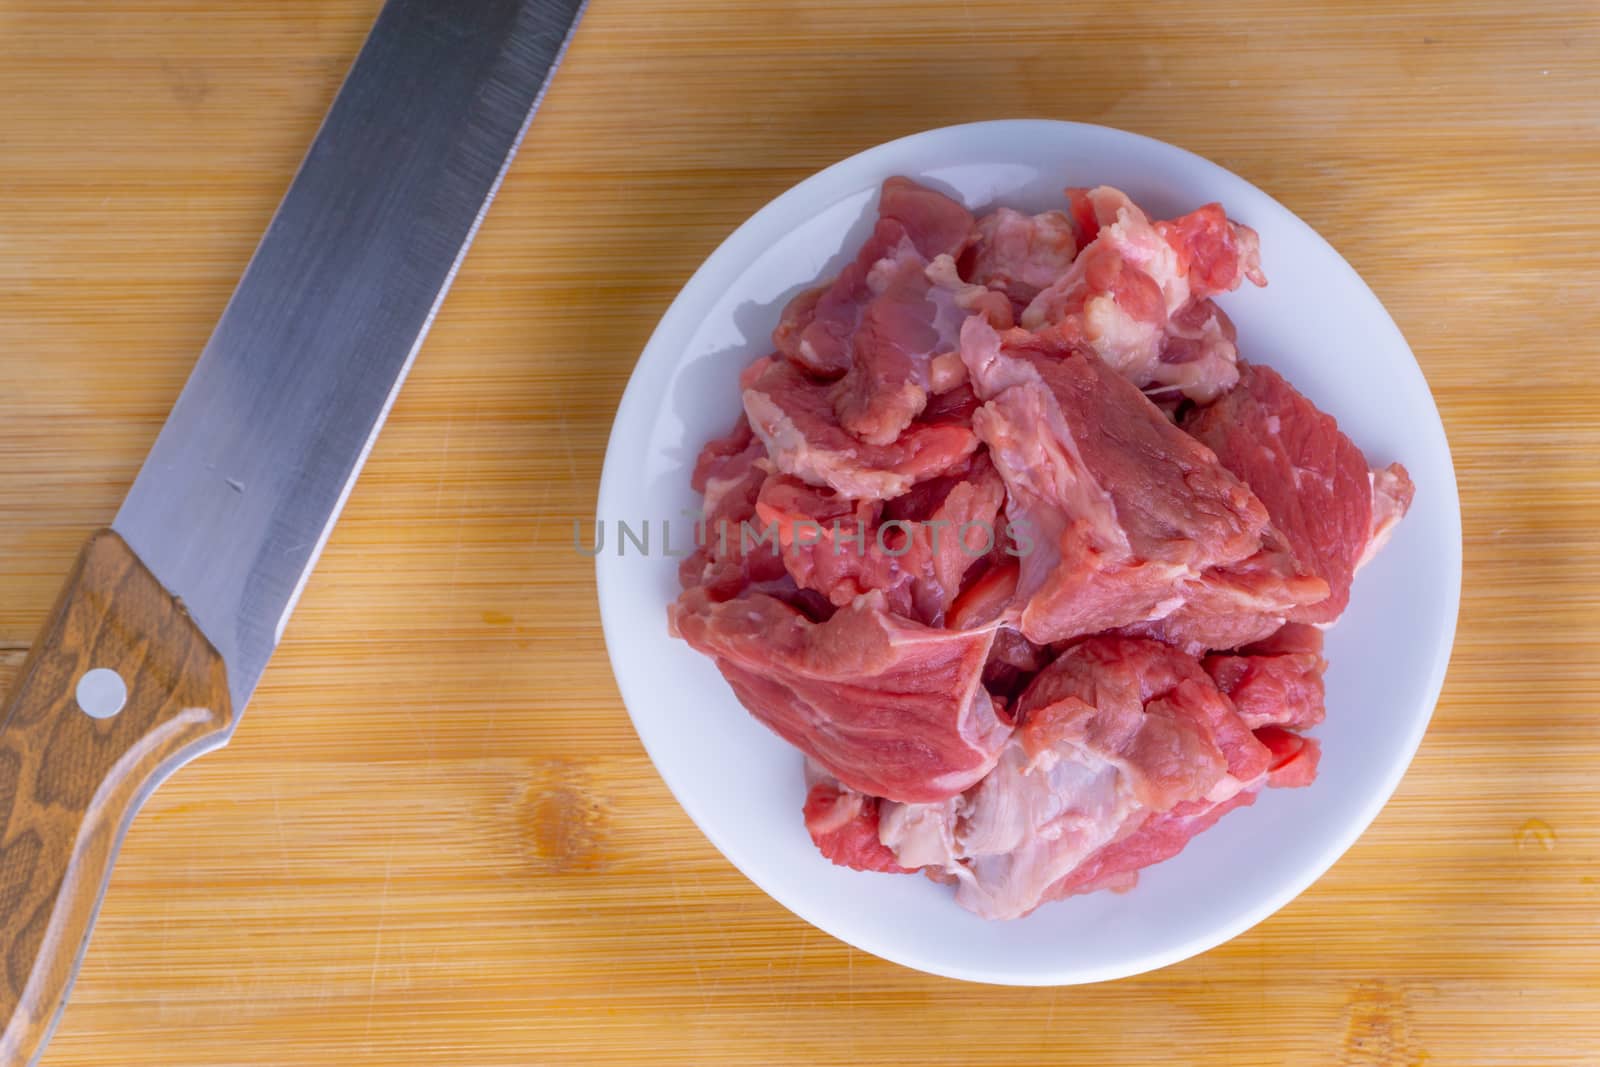 Fresh raw beef steak on wooden background with selective focus by silverwings